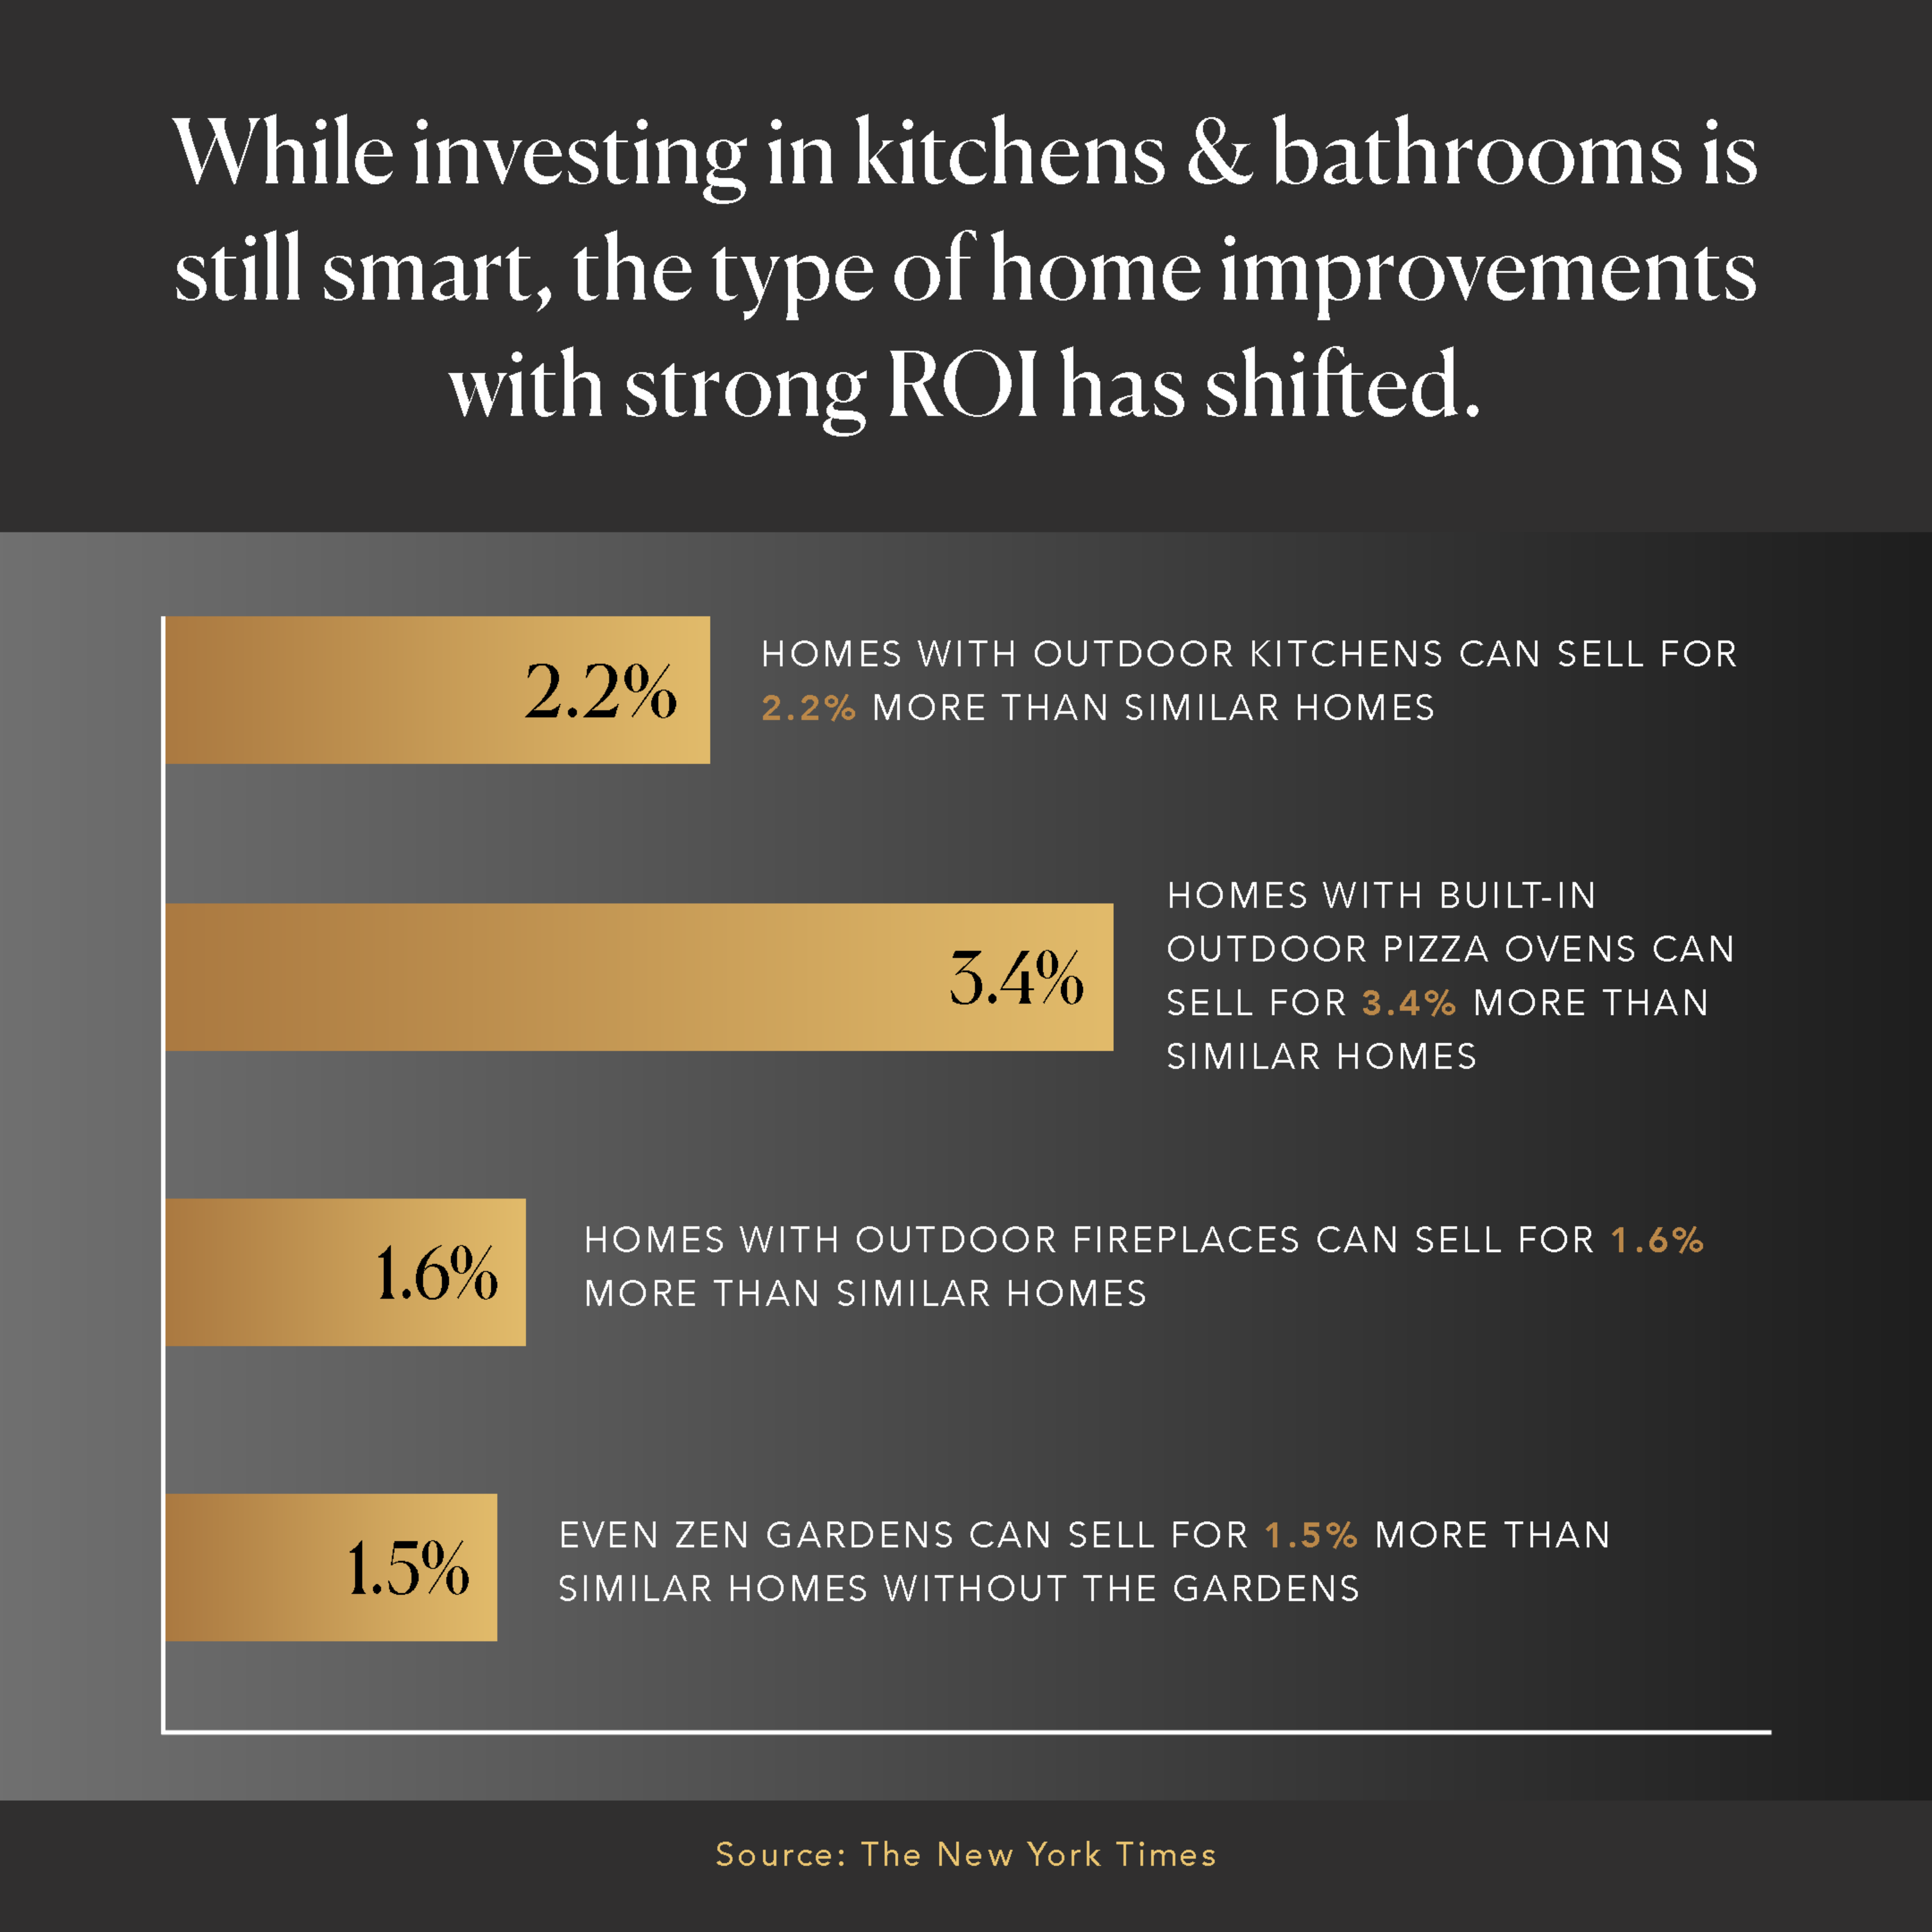 While investing in kitchens & bathrooms is still smart, the type of home improvements with strong ROI has shifted.